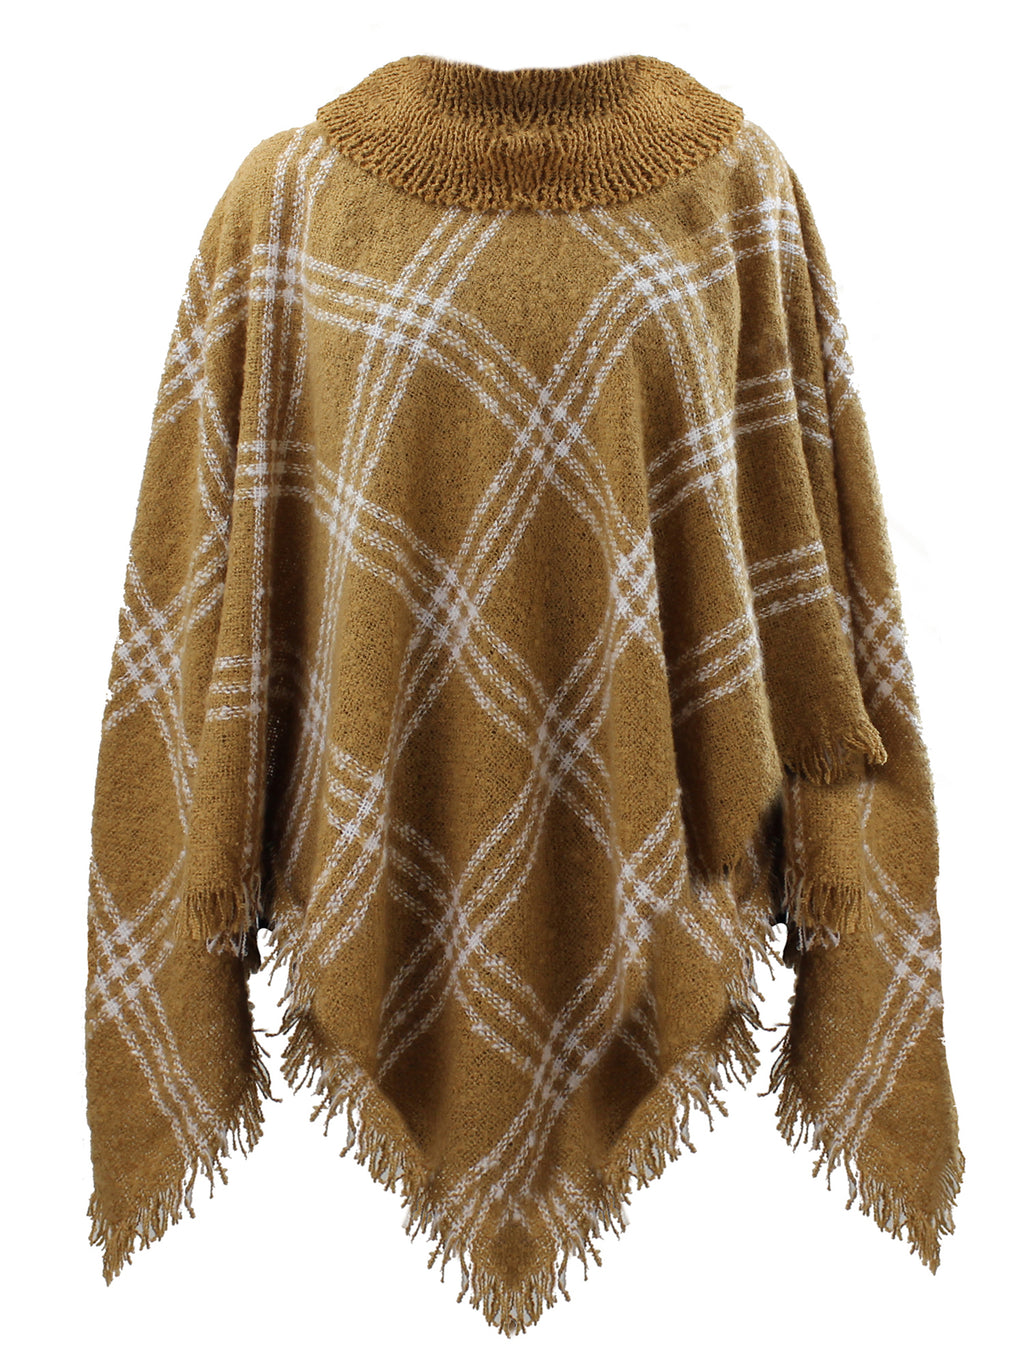 Camel Beige Cowl Neck Womens Pullover Poncho Cape